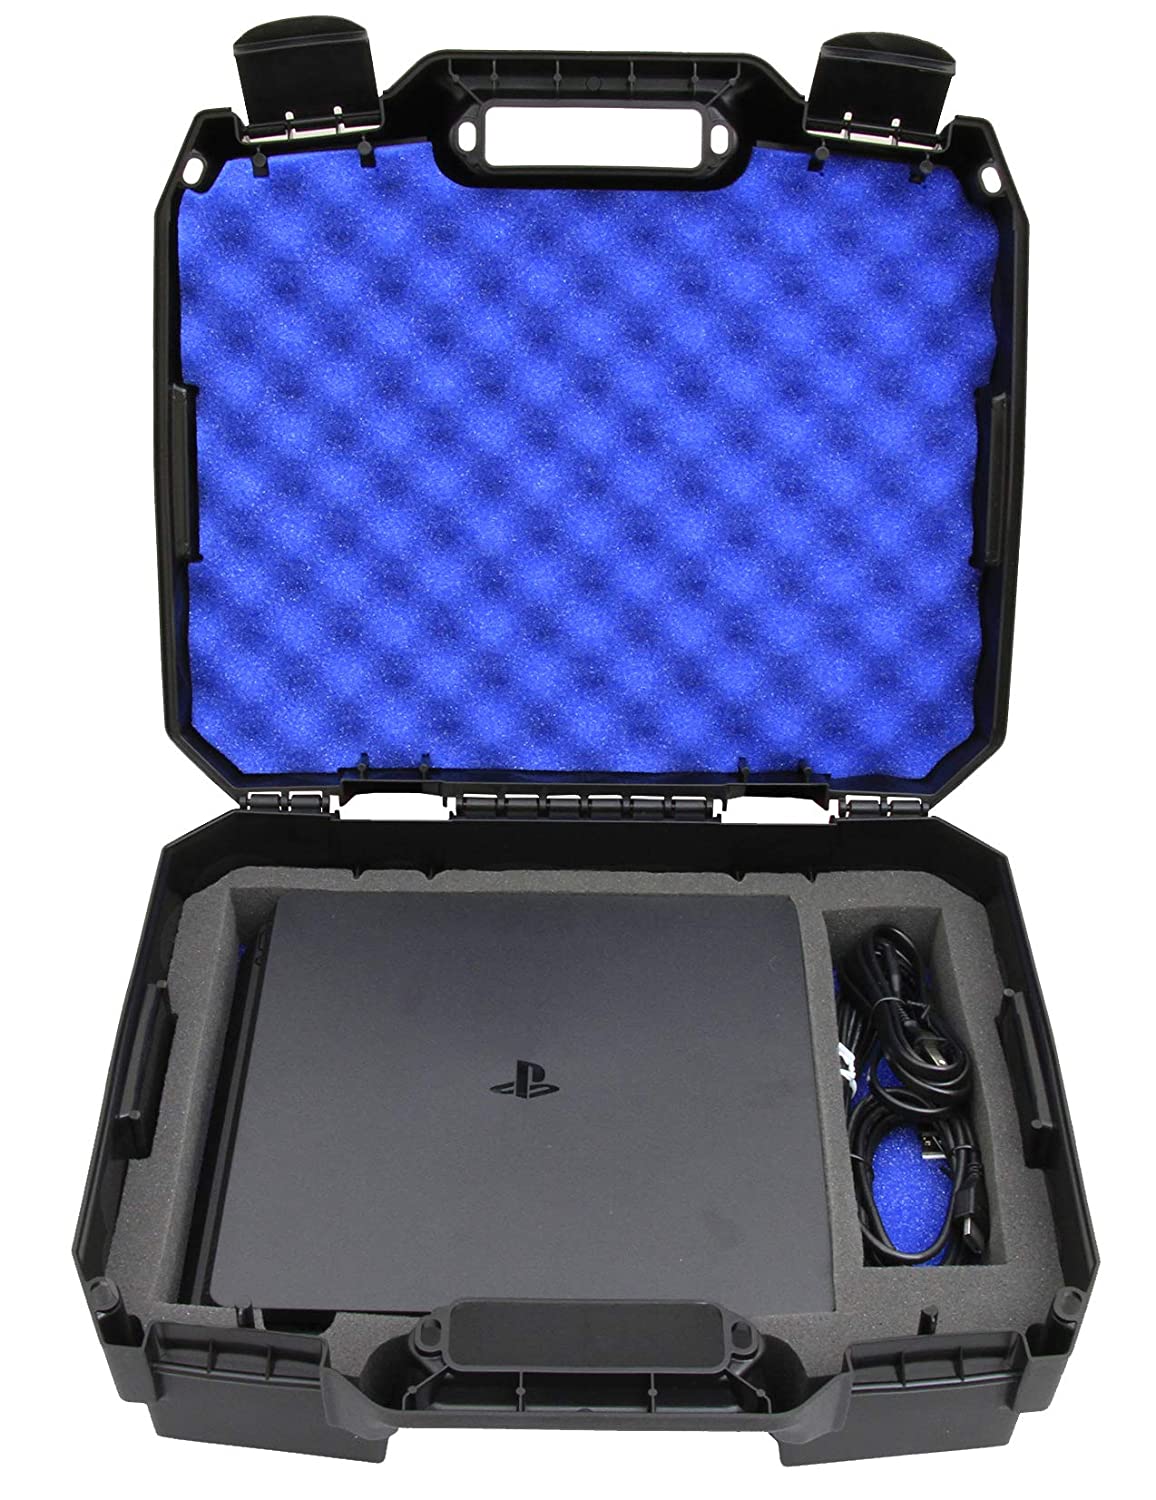 CASEMATIX Travel Compatible with PlayStation 4 Slim 1TB Console and Accessories such as Controllers, Wireless Move Motion, Games and Cables Lightweight & Affordable Hard Cases For Microphones, Guns, PS5s & More